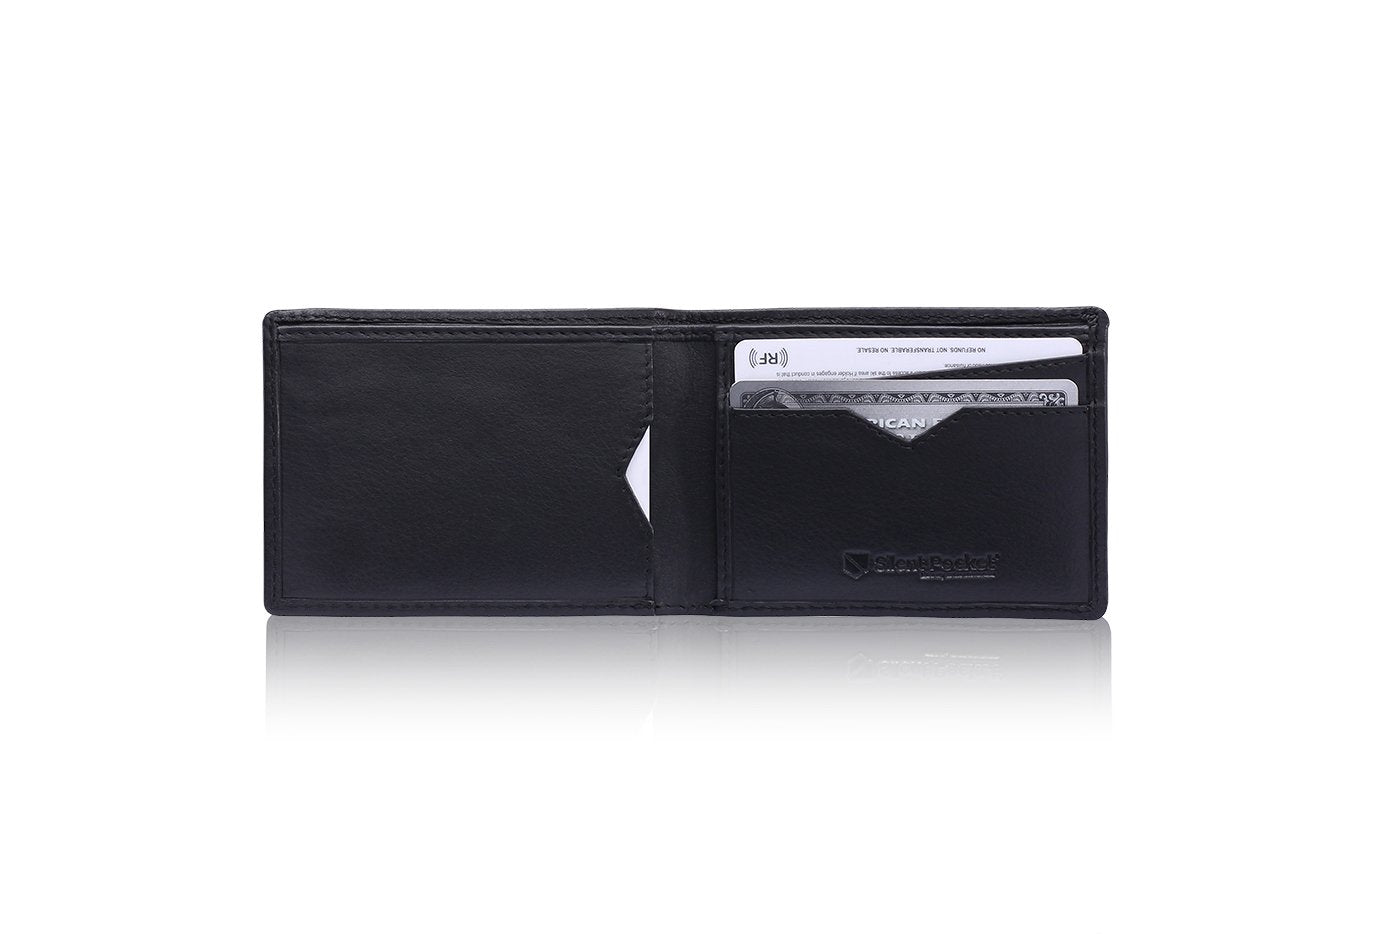 Keyport offers a curated collection of top quality everyday carry (EDC) wallets from companies like Silent Pocket, Nomad, and Dango